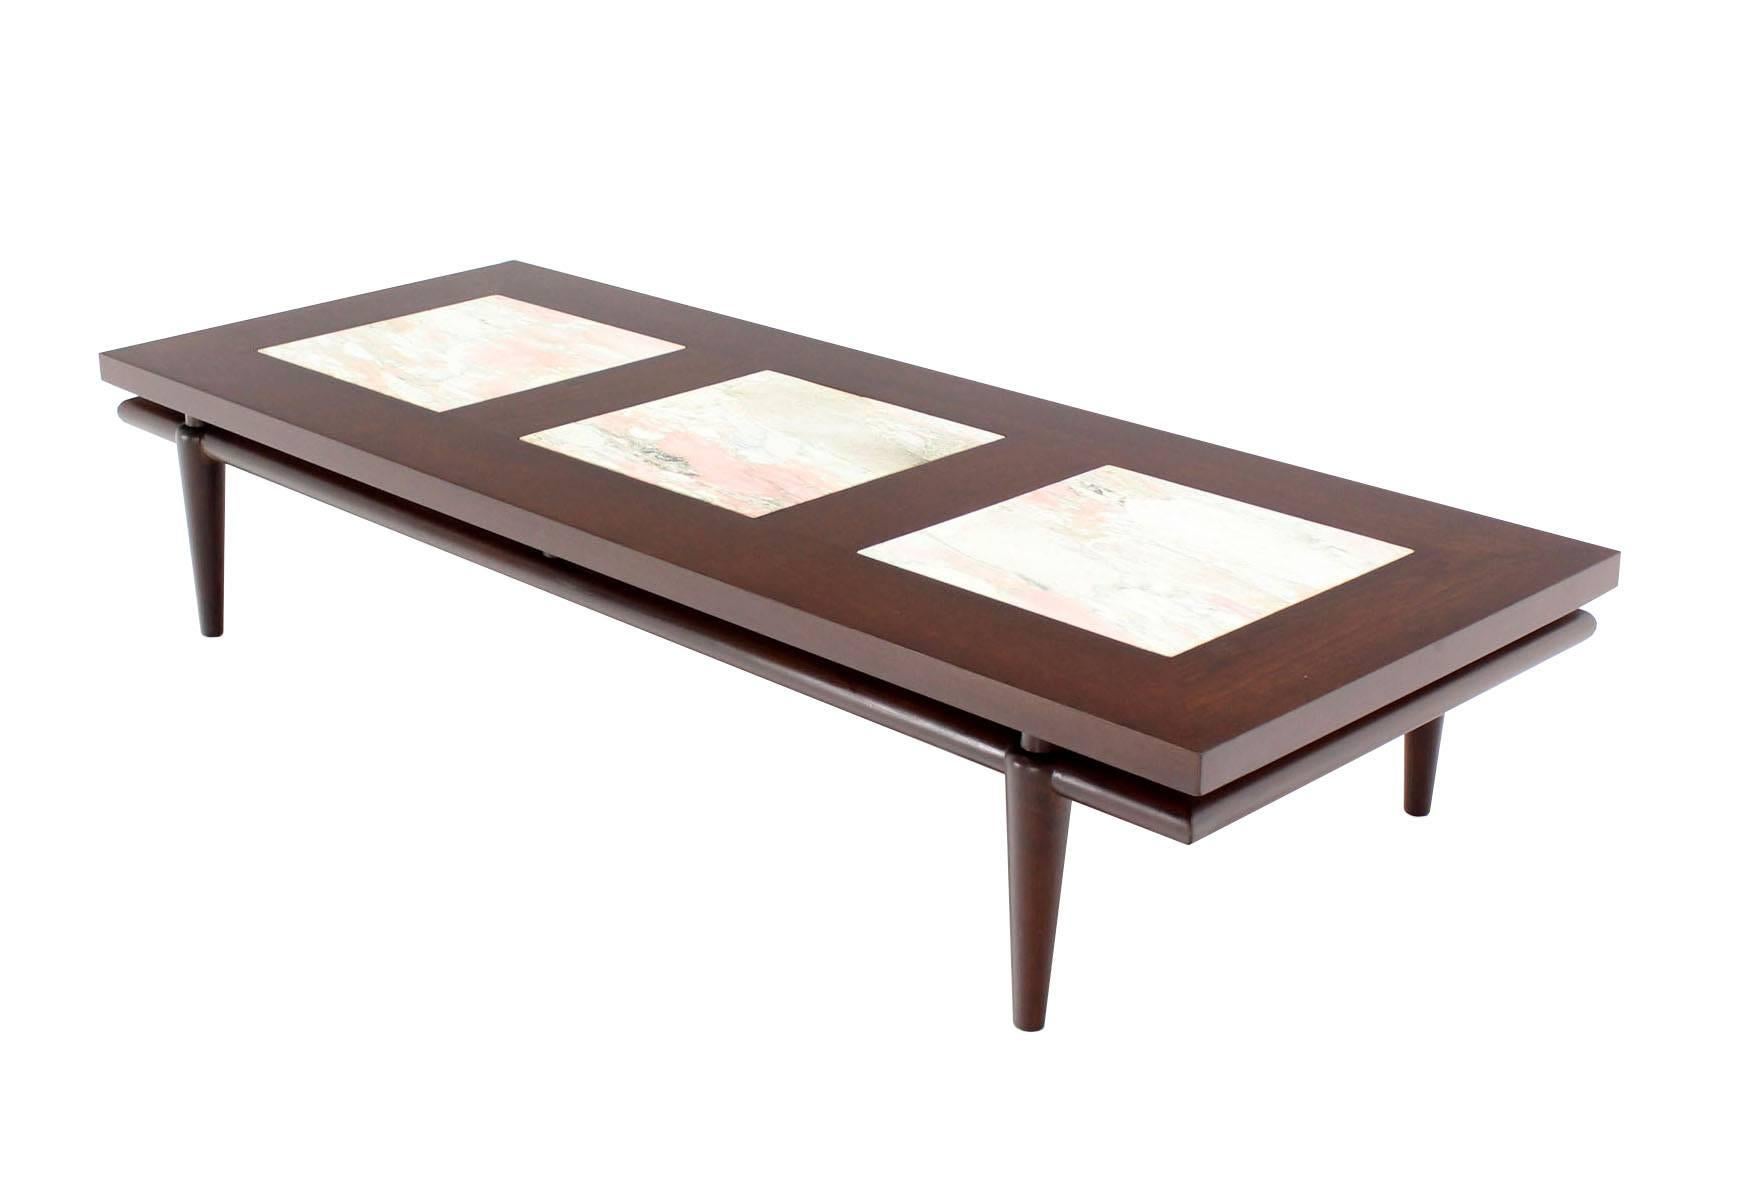 Nice "floating" rectangle top with three marble inserts coffee table by Widdicomb.